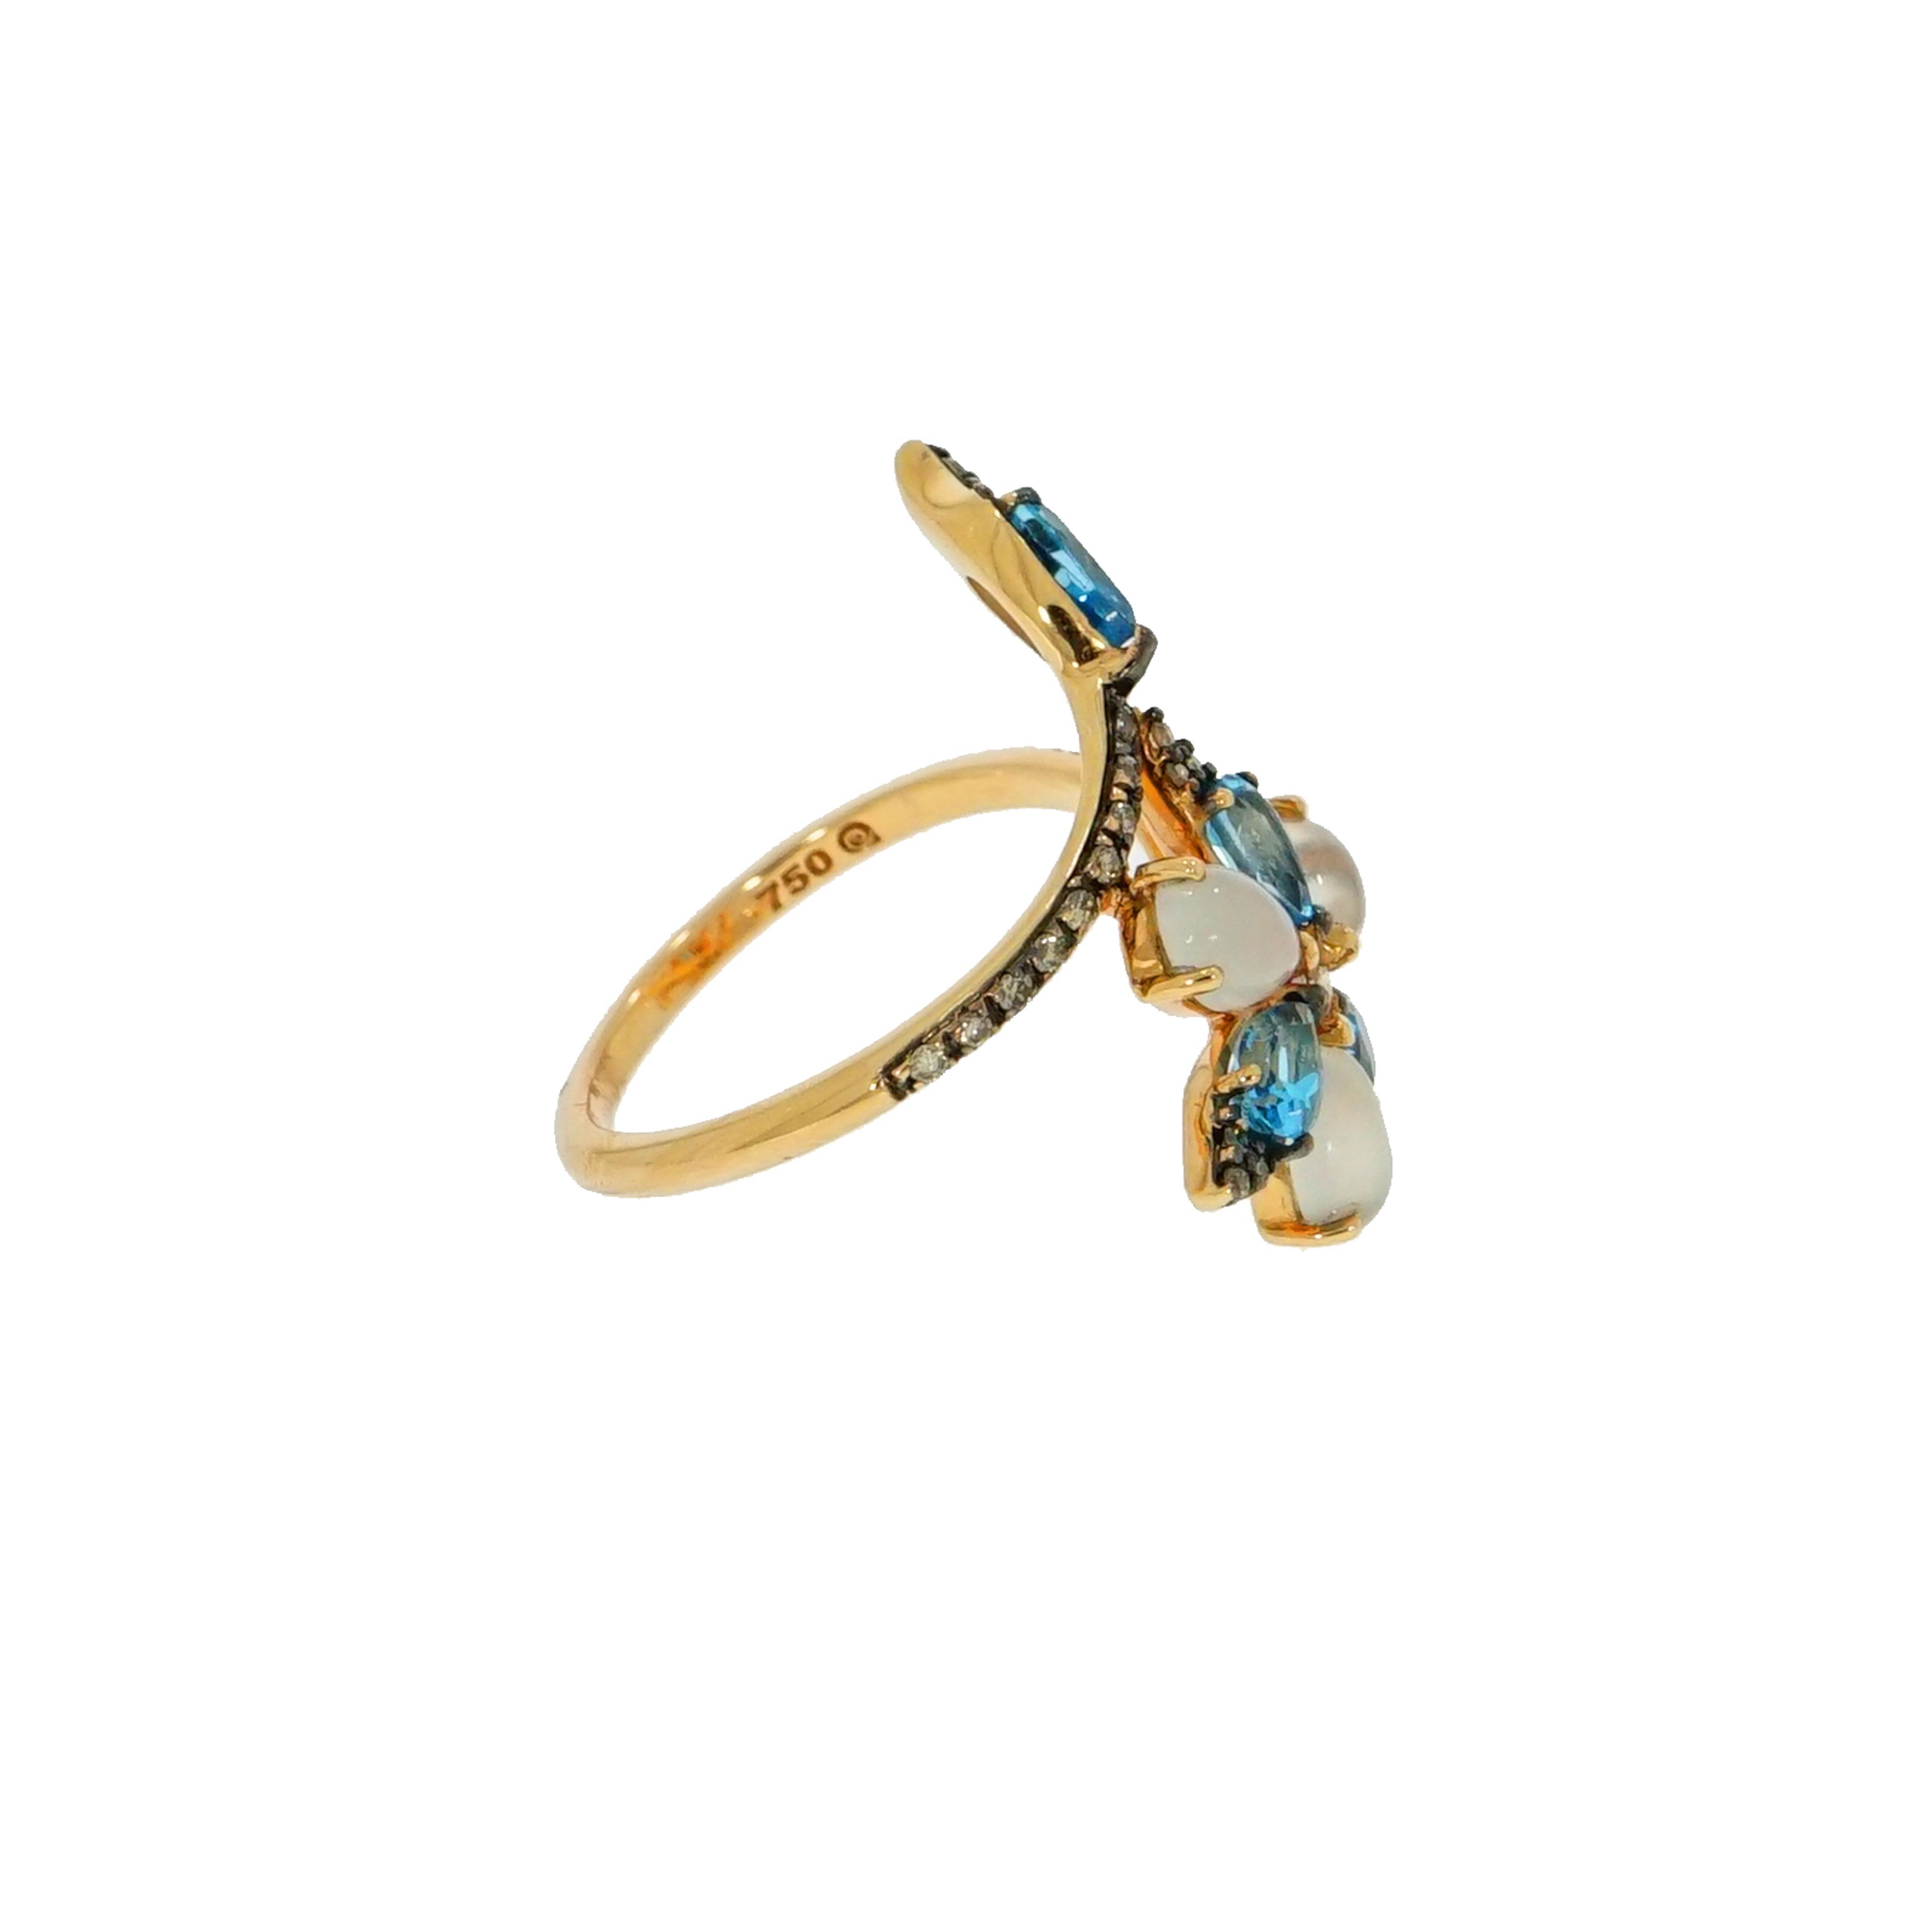 Passion for jewelry, design, precious gems, for the art and uniqueness of the “handmade” and the pursuit of excellence in every detail... are some of the ingredients to create this Blue Topaz and Moonstone Ring that will be part of everyday life,